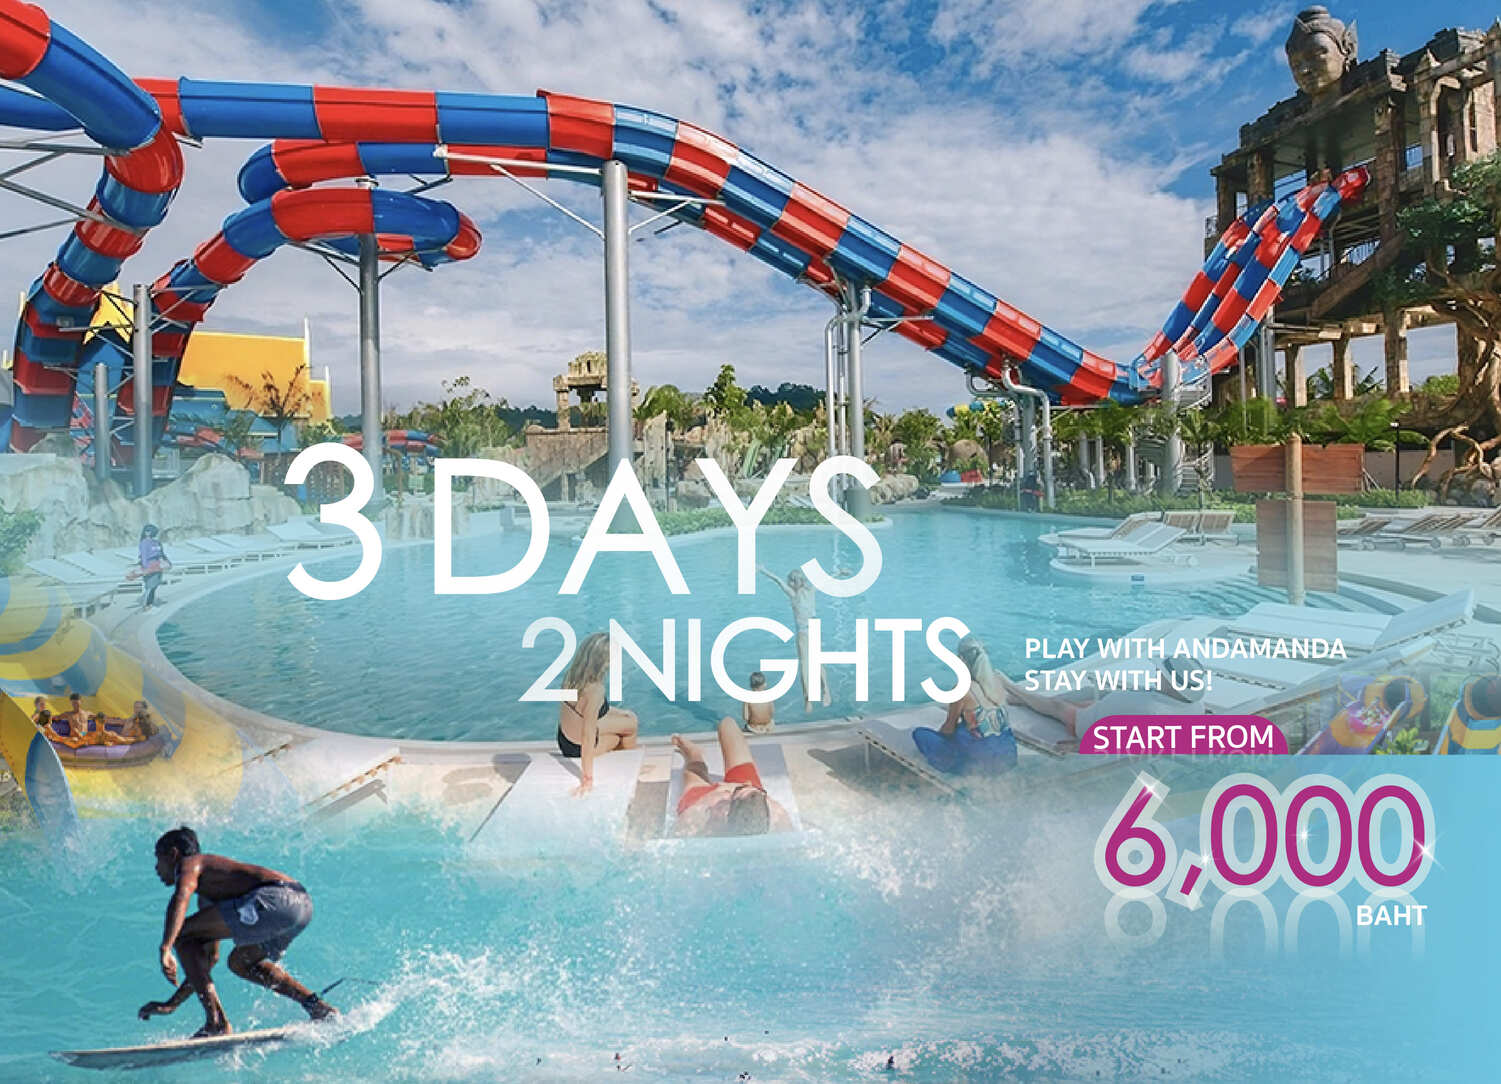 Experience the Thrill of Rides and Waterslides